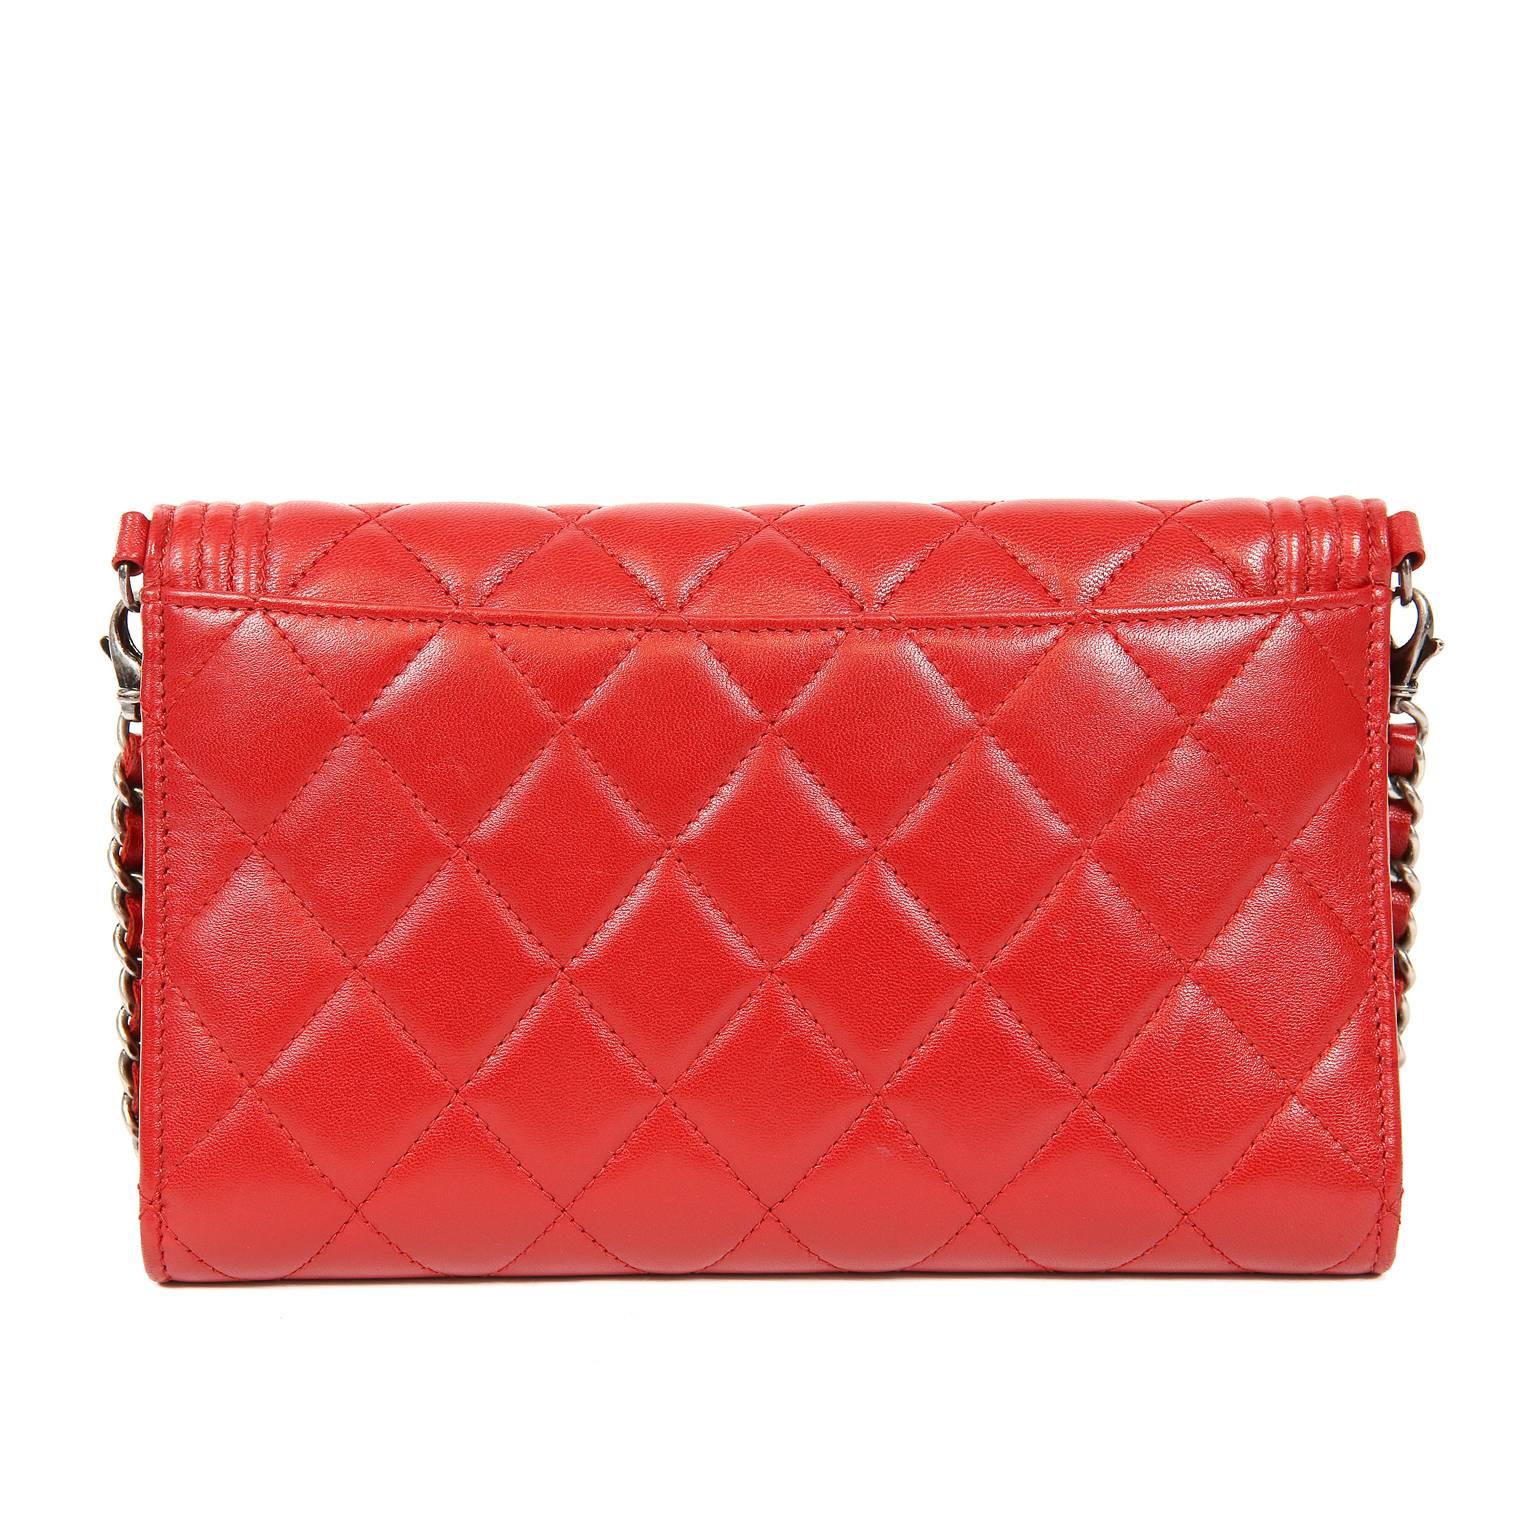 Chanel Red Leather Boy Bag Clutch with Chain- MINT
Timeless and versatile, Chanel’s updated Boy Bag Clutch is a brilliant piece for any collection.  Lipstick red leather is quilted in signature Chanel diamond stitched pattern.  Boy Bag welted frame